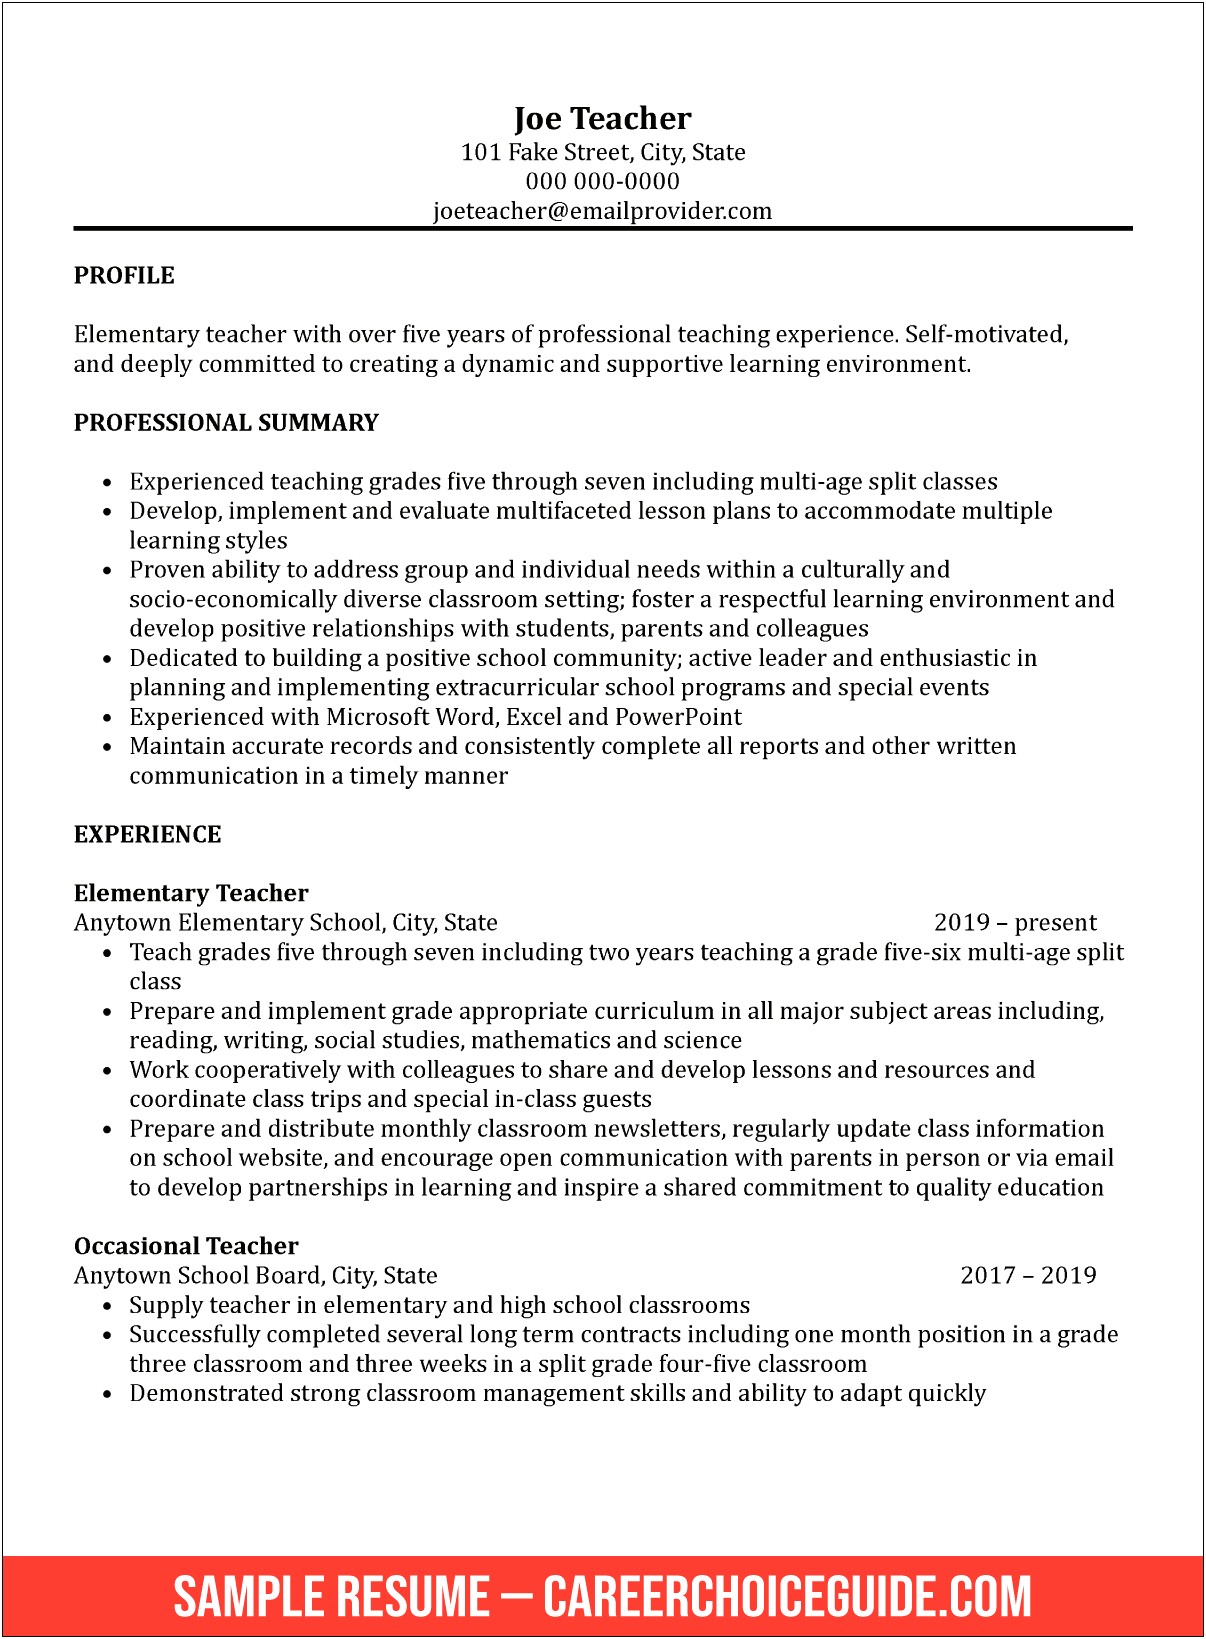 Words To Use On Resume For Educator